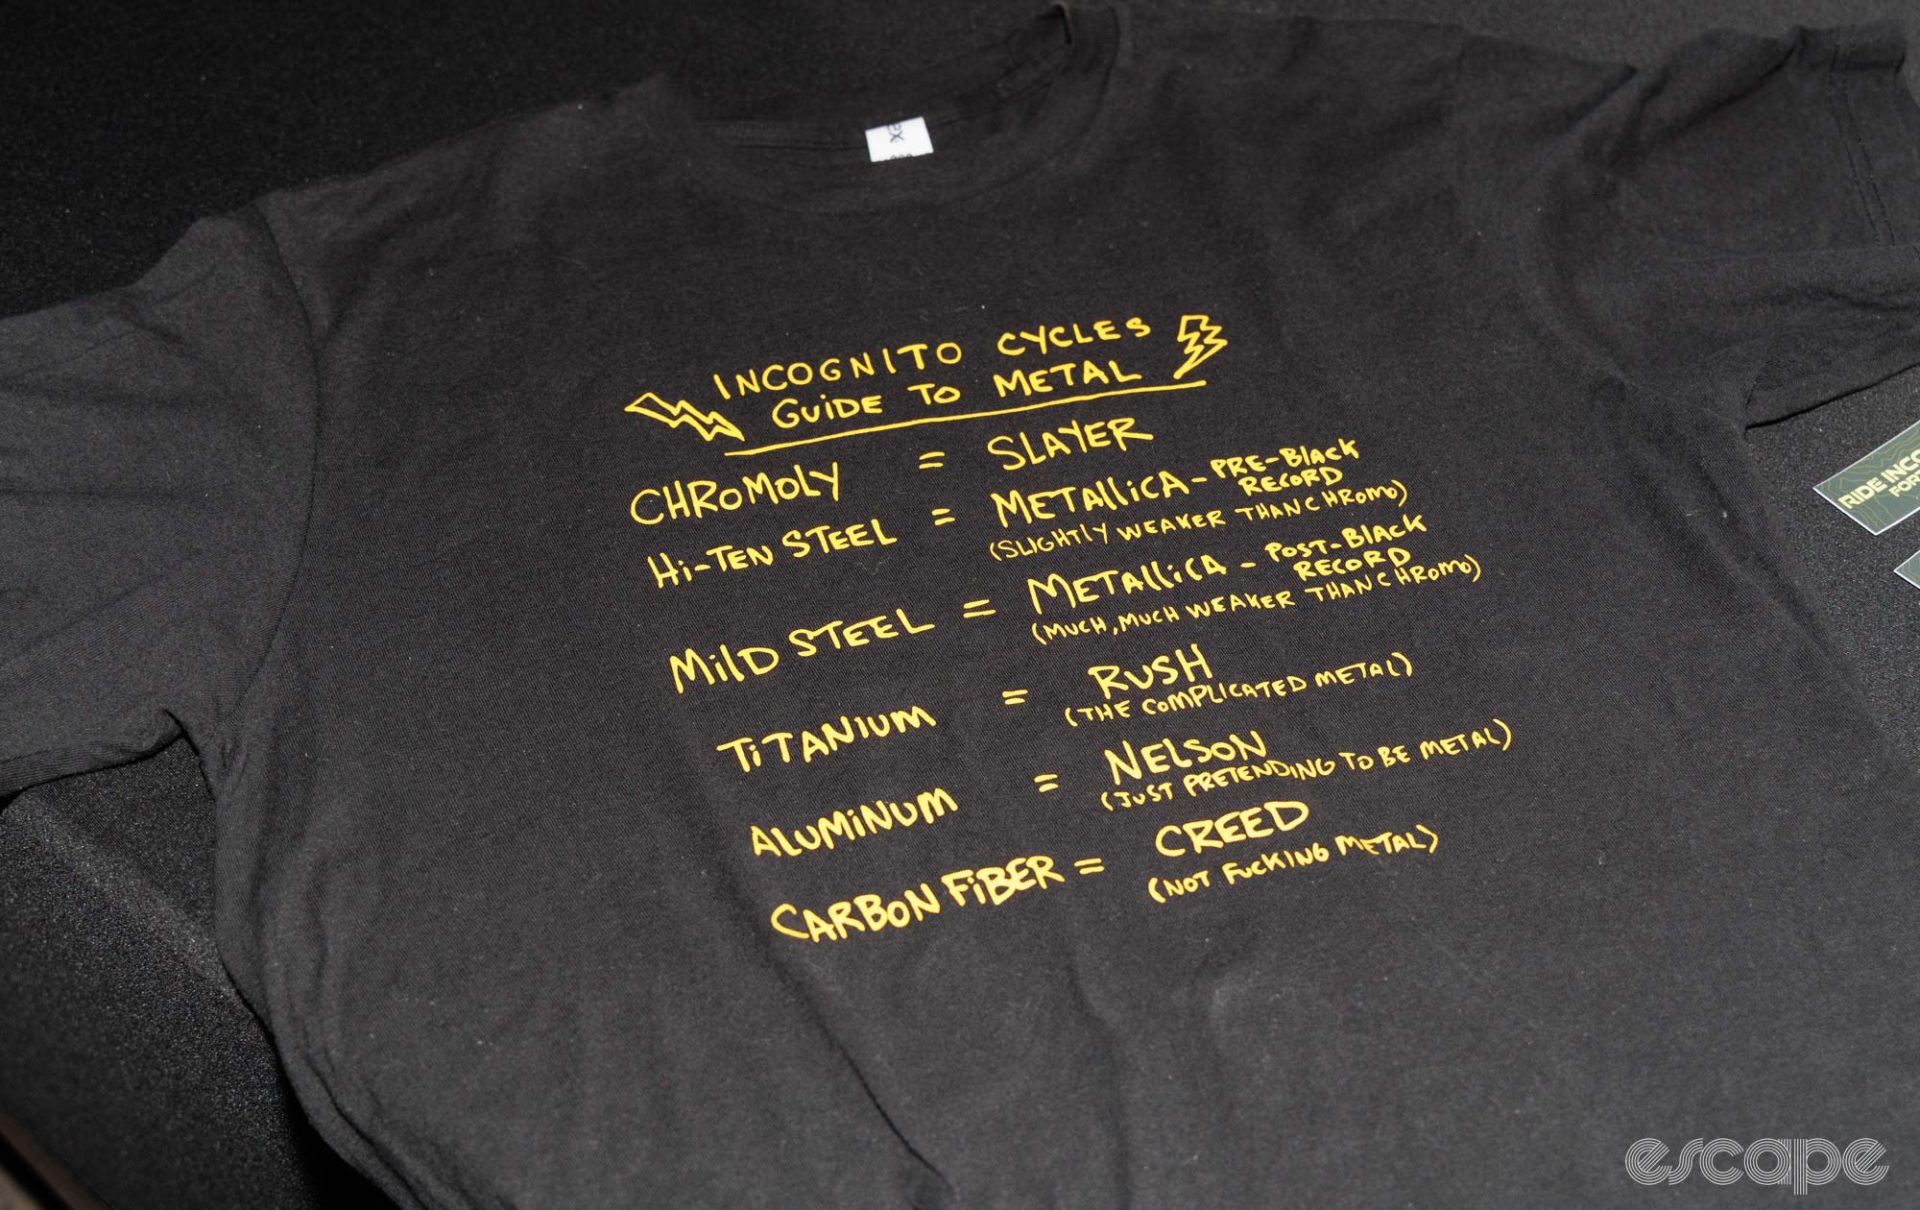 A humorous t-shirt explaining bicycle materials in relation to music. 